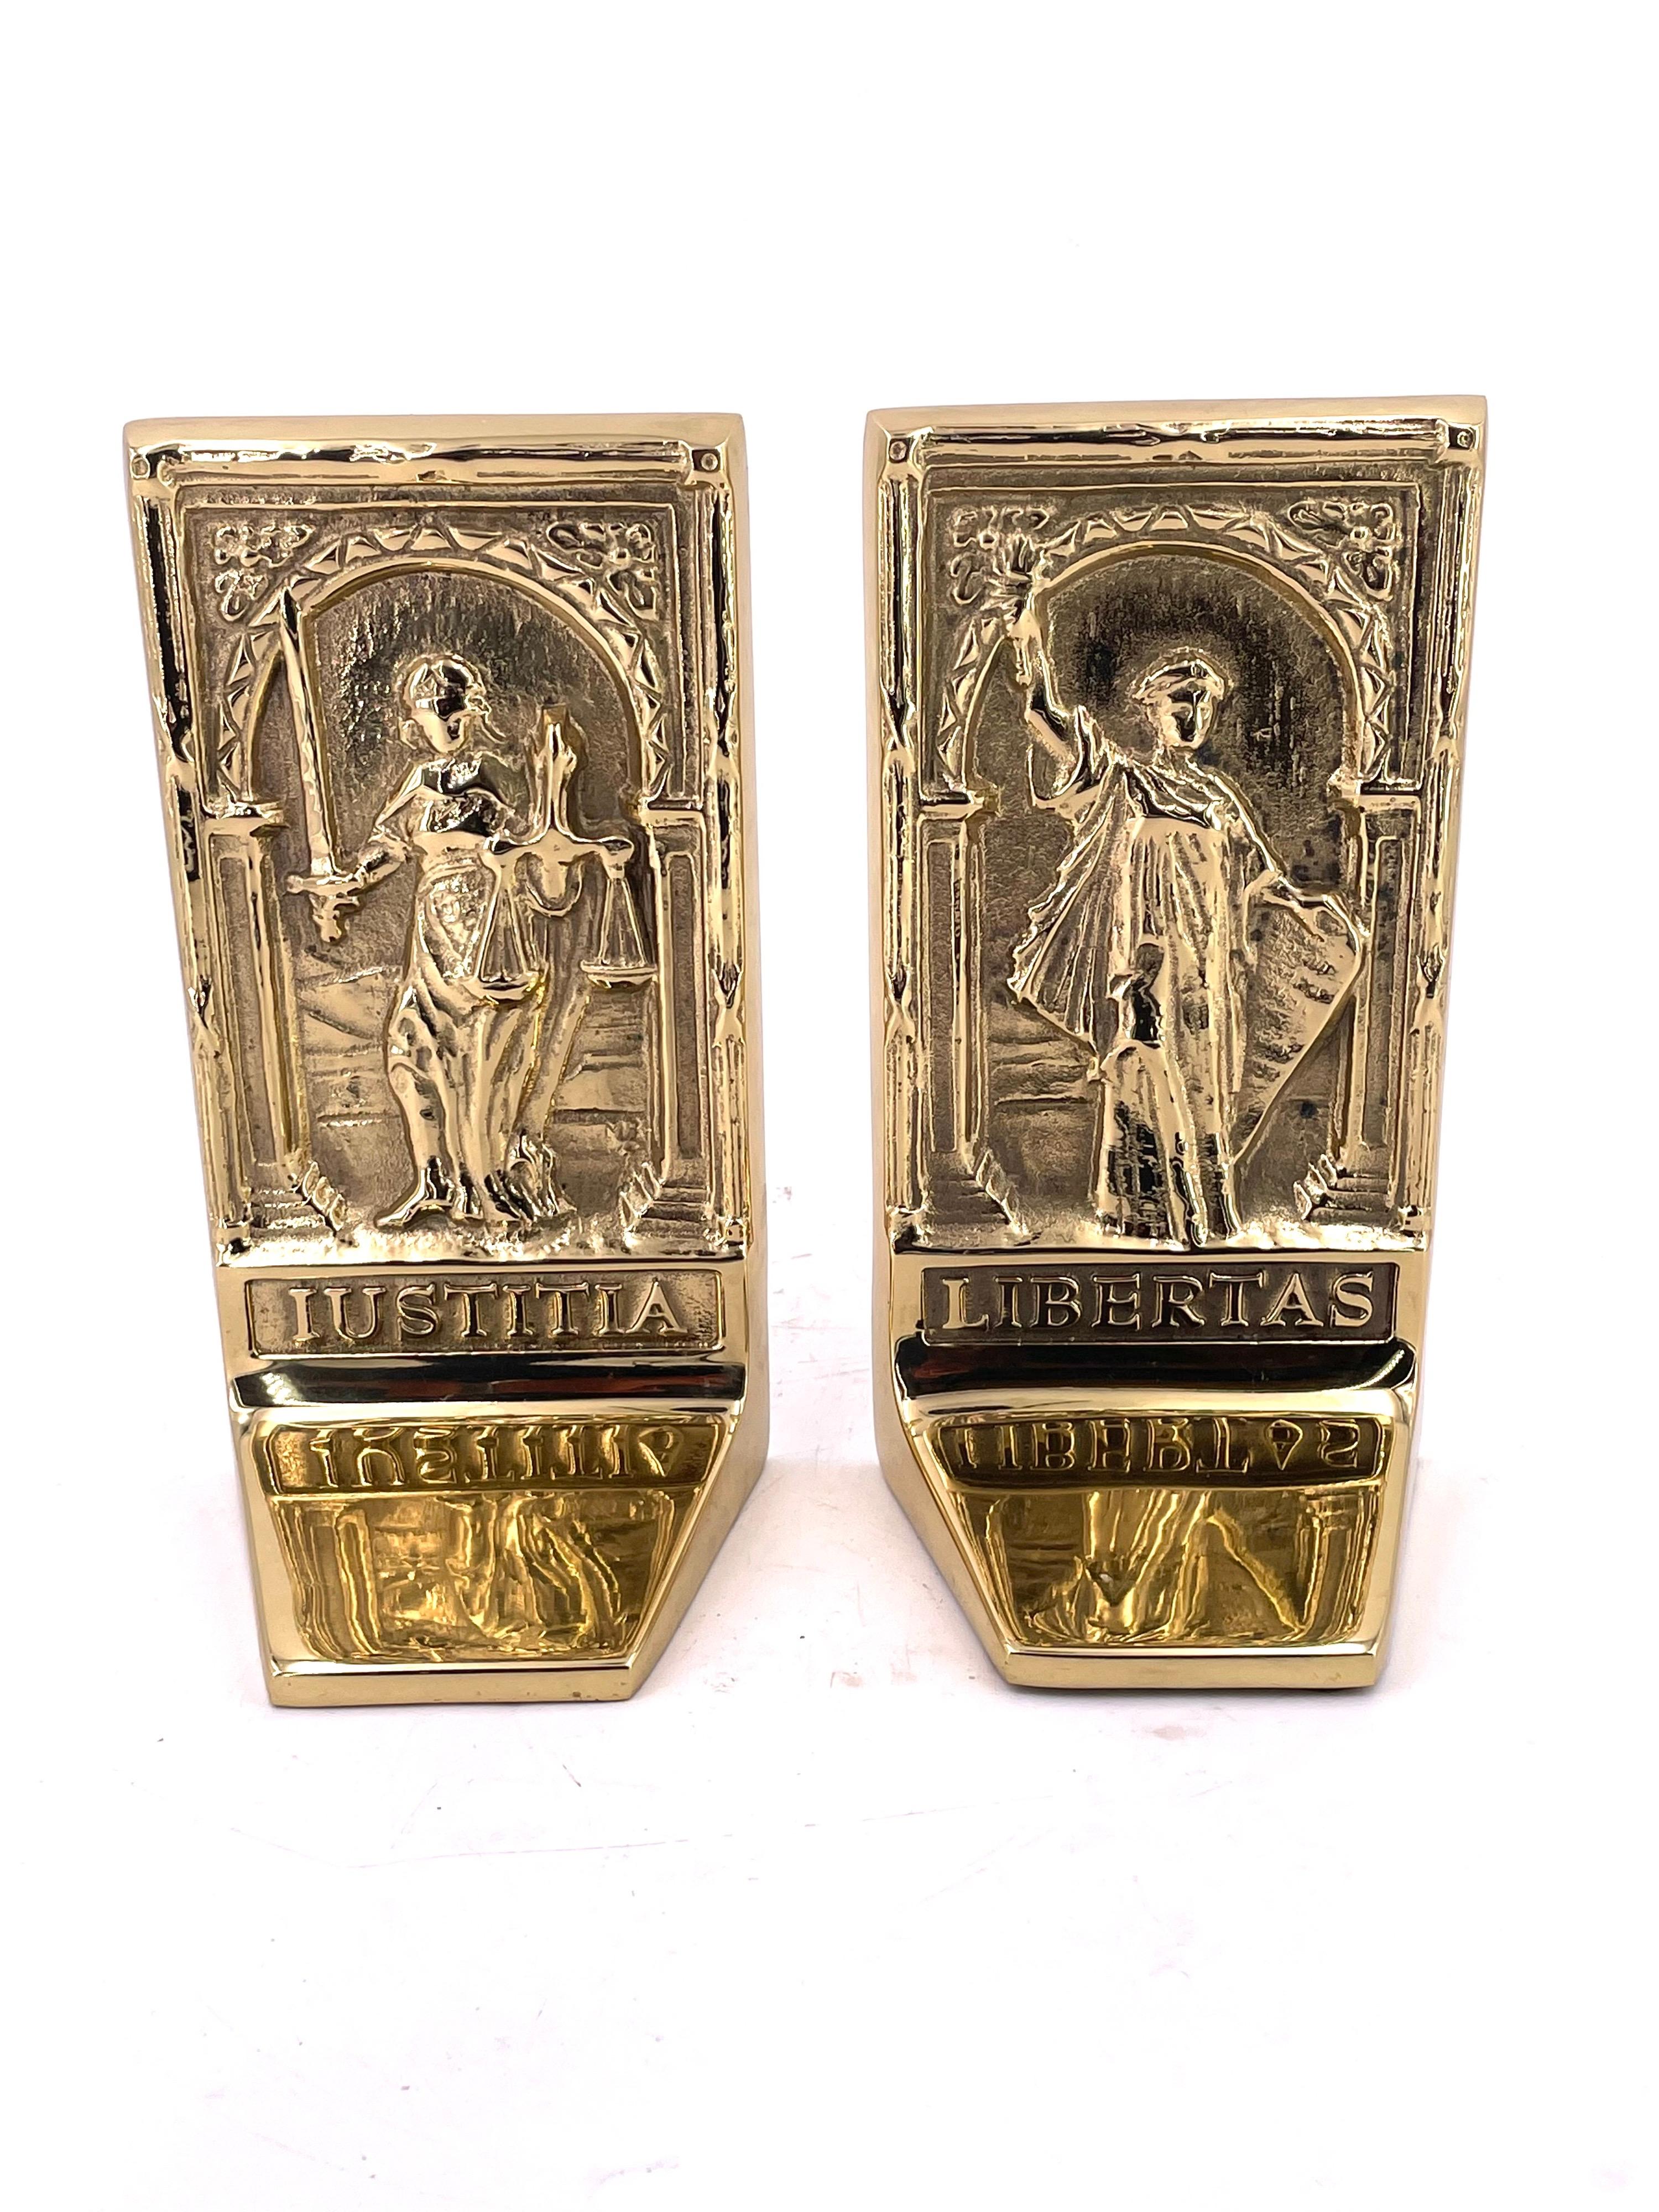 Beautiful brass set of collectible bookends with legends by Aristotle and Thomas Jefferson, manufactured in 1996 by Virginia Metalcrafters great quality.